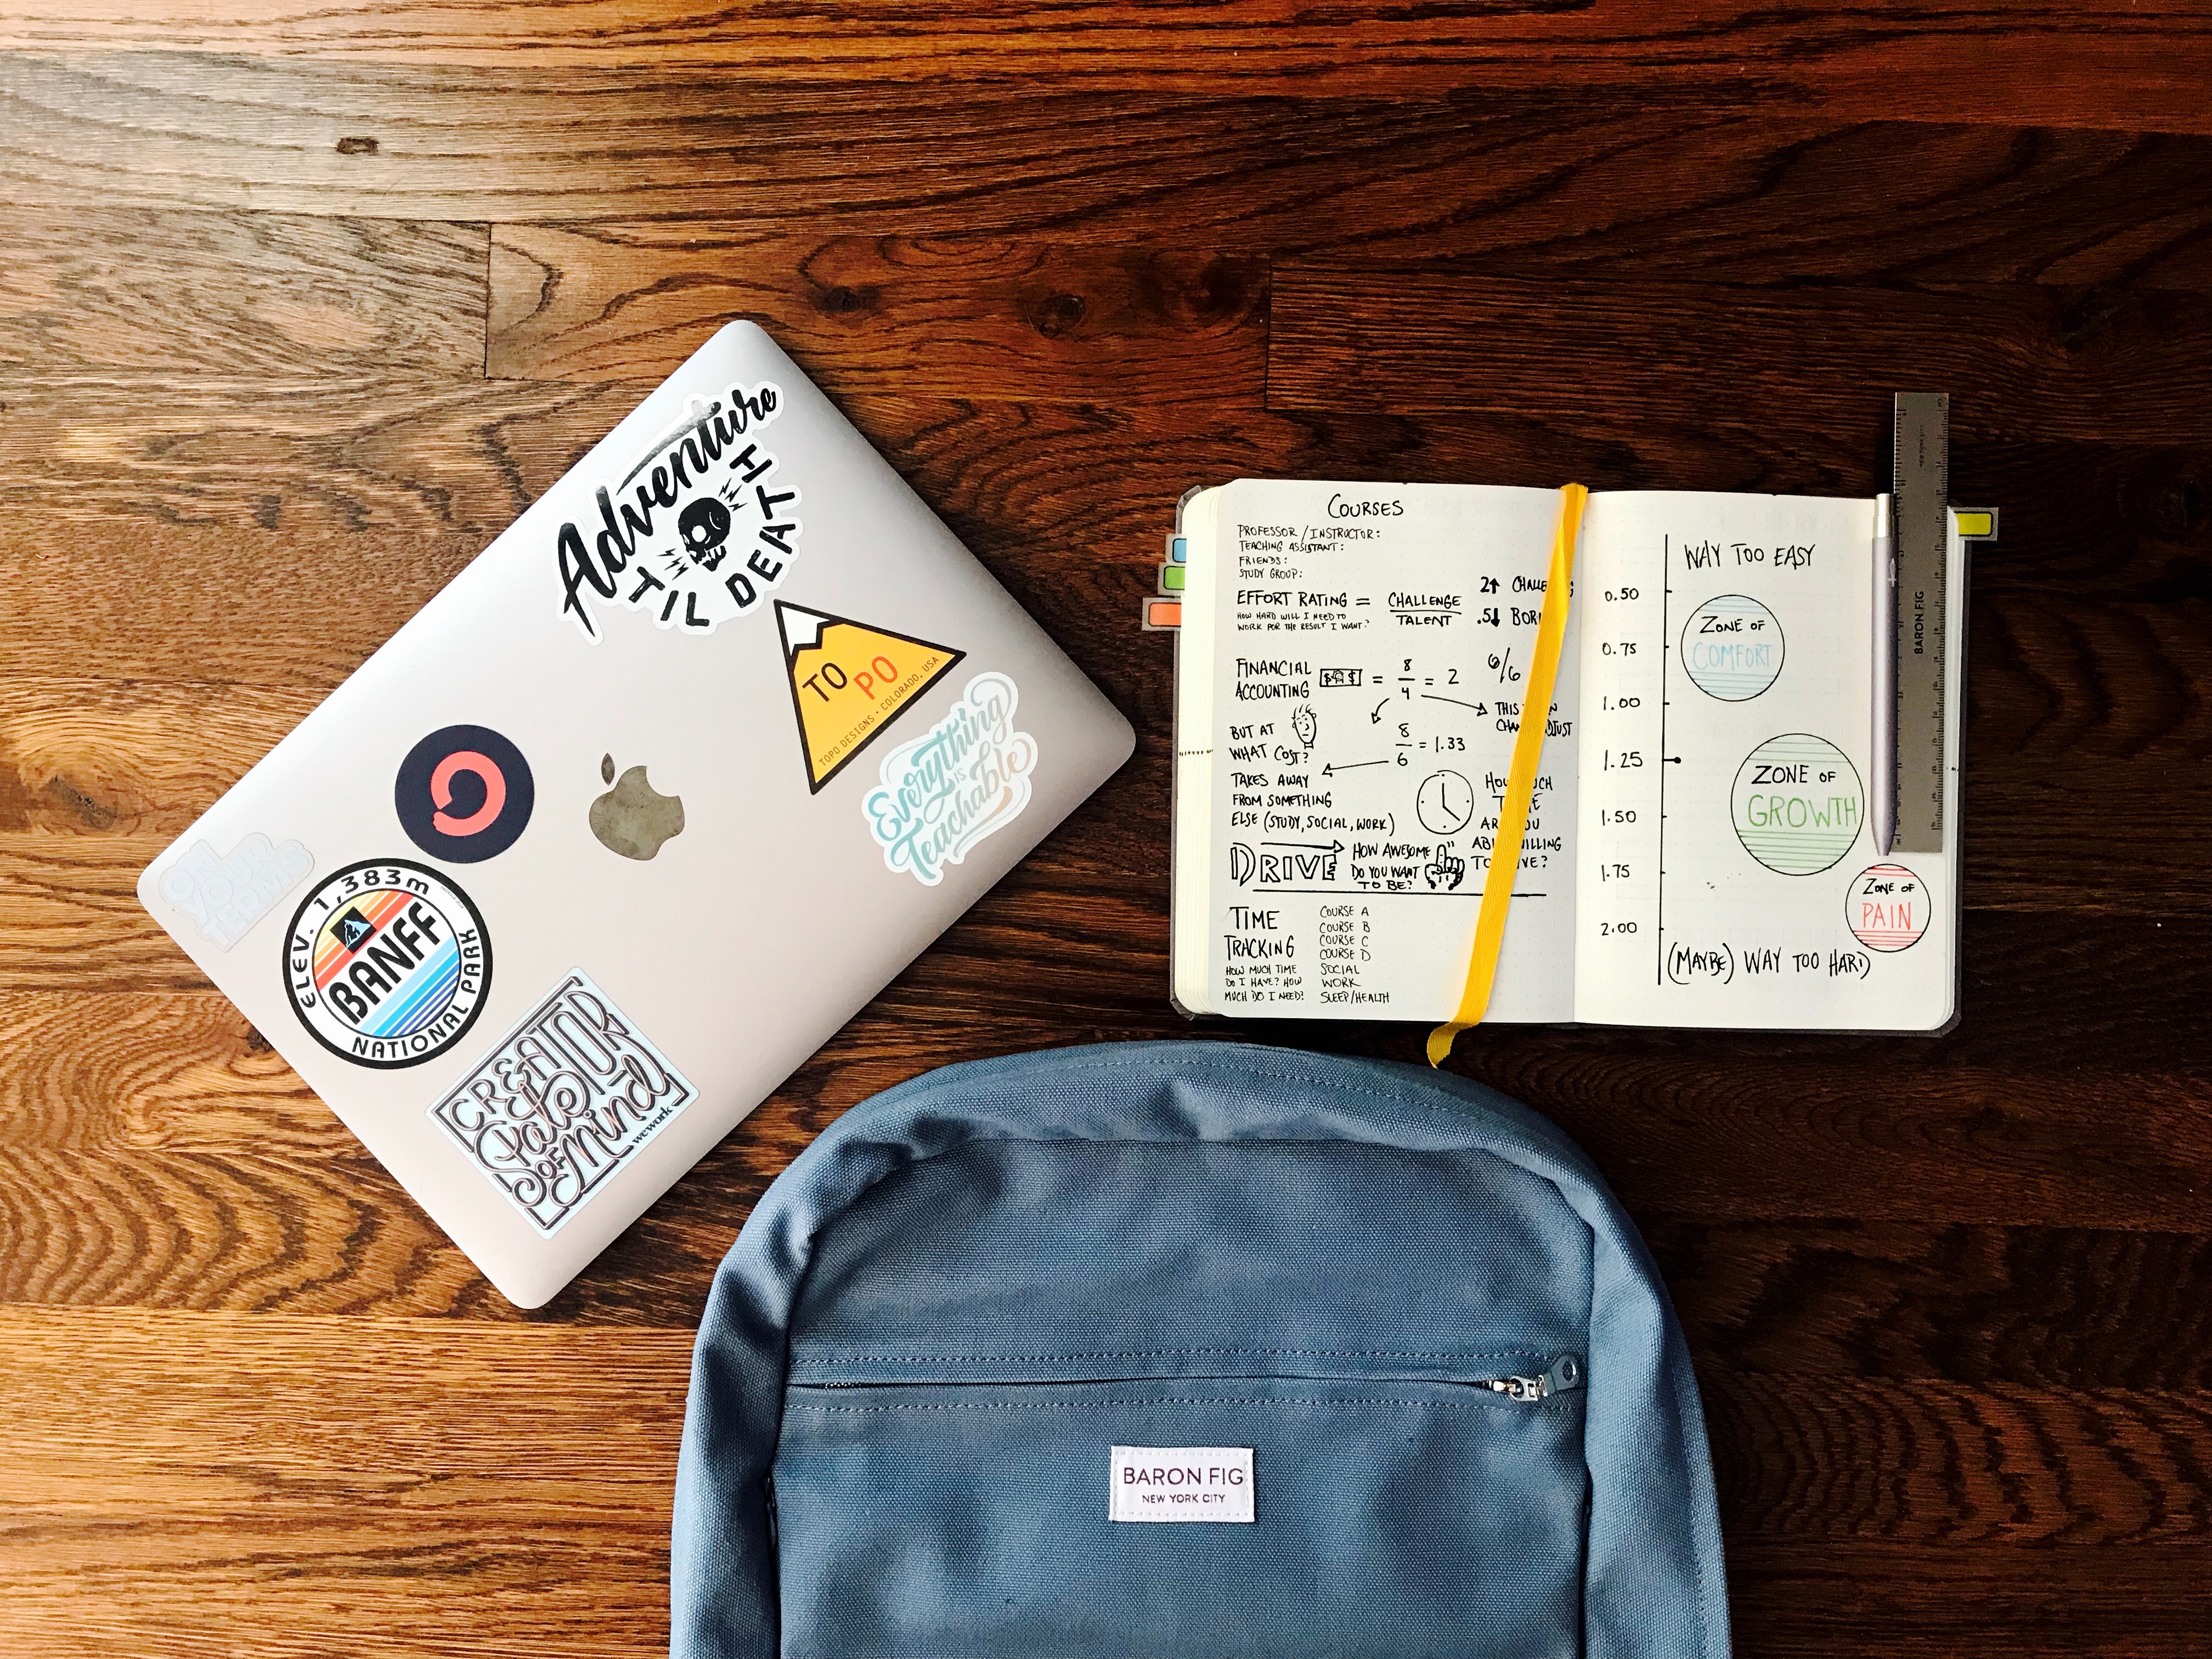 Photo of a laptop next to a planner and a backpack.